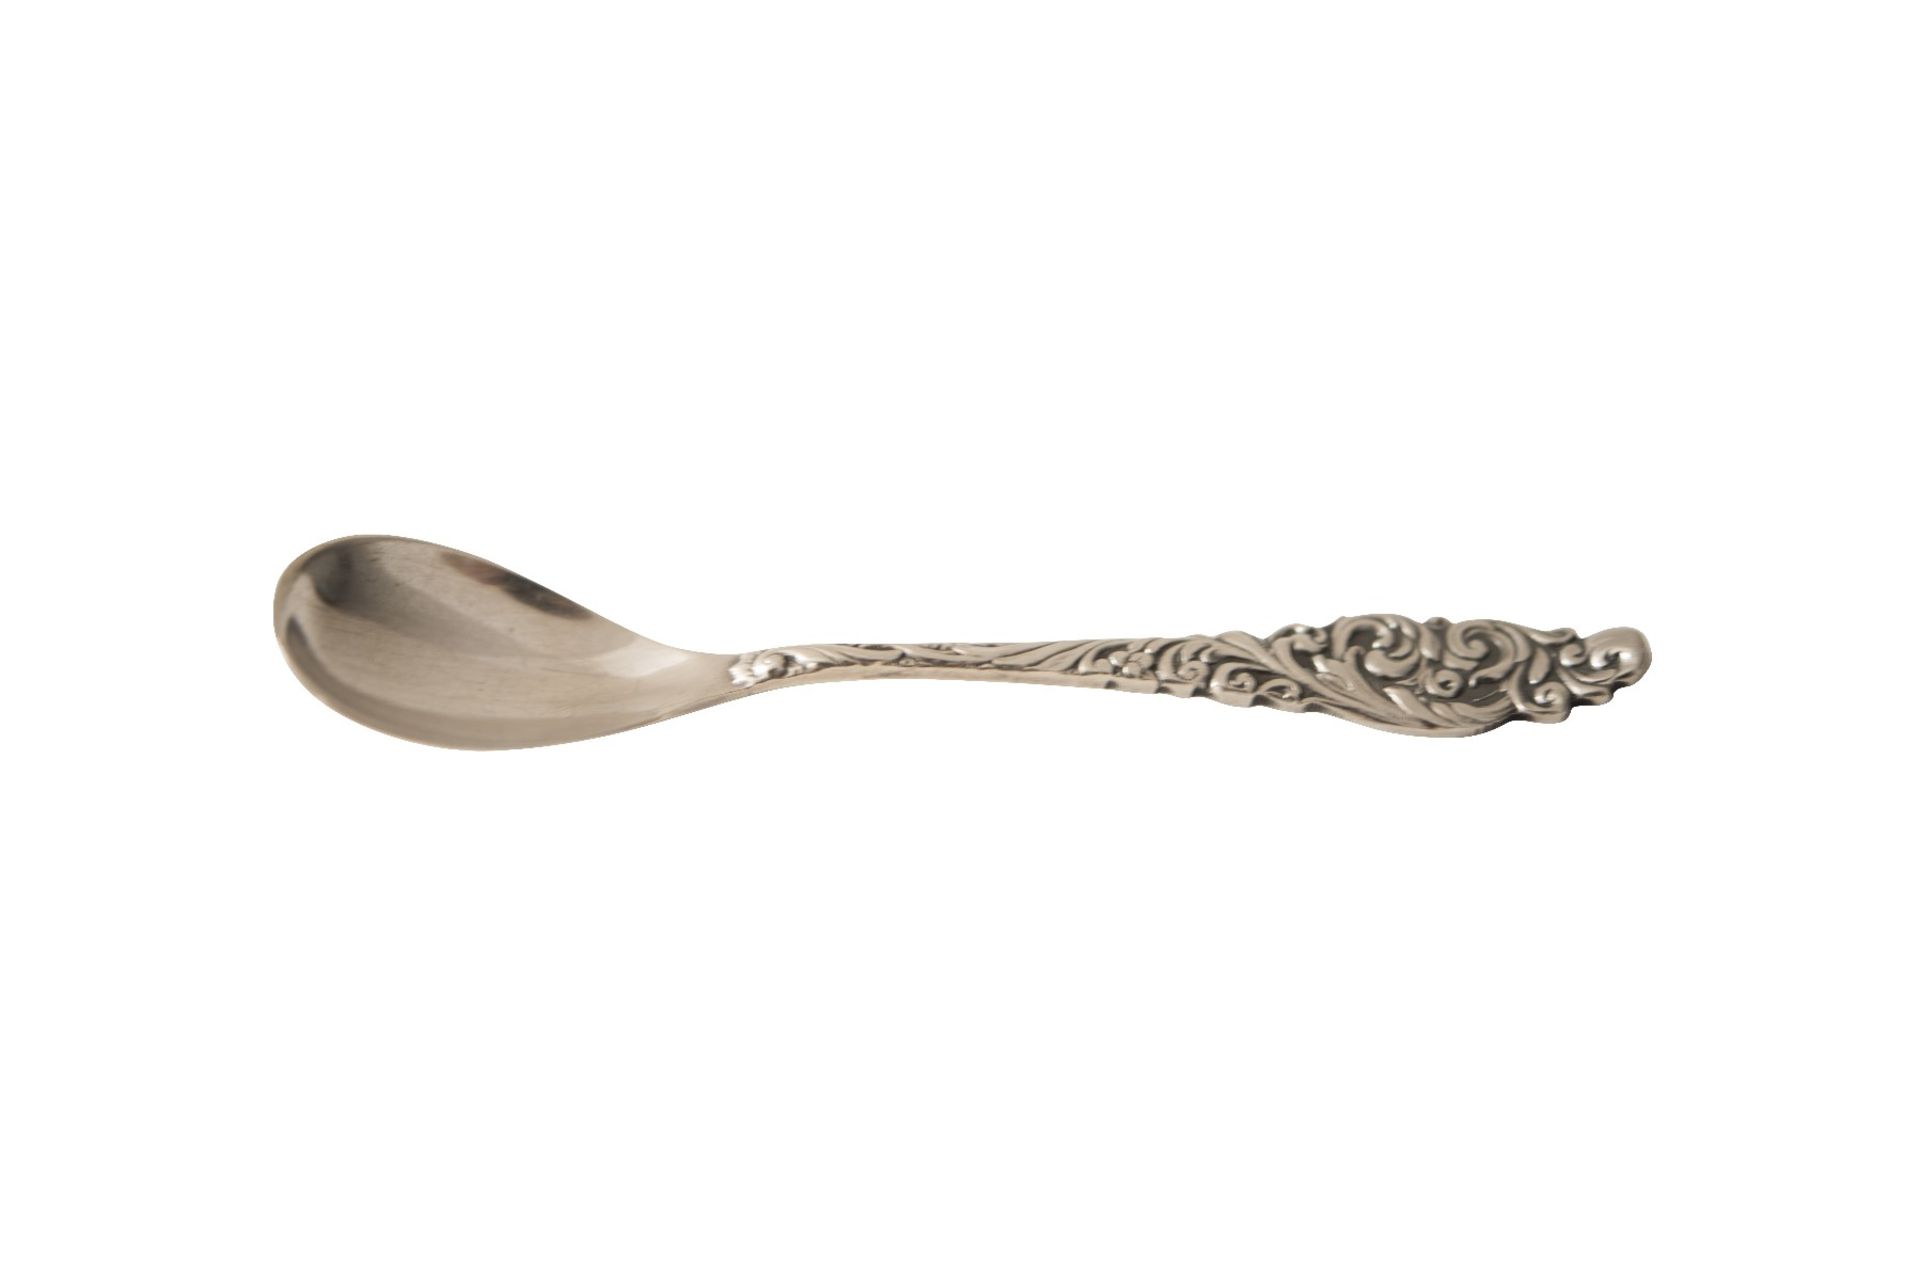 Coffee spoon with decorated handles - Image 4 of 8